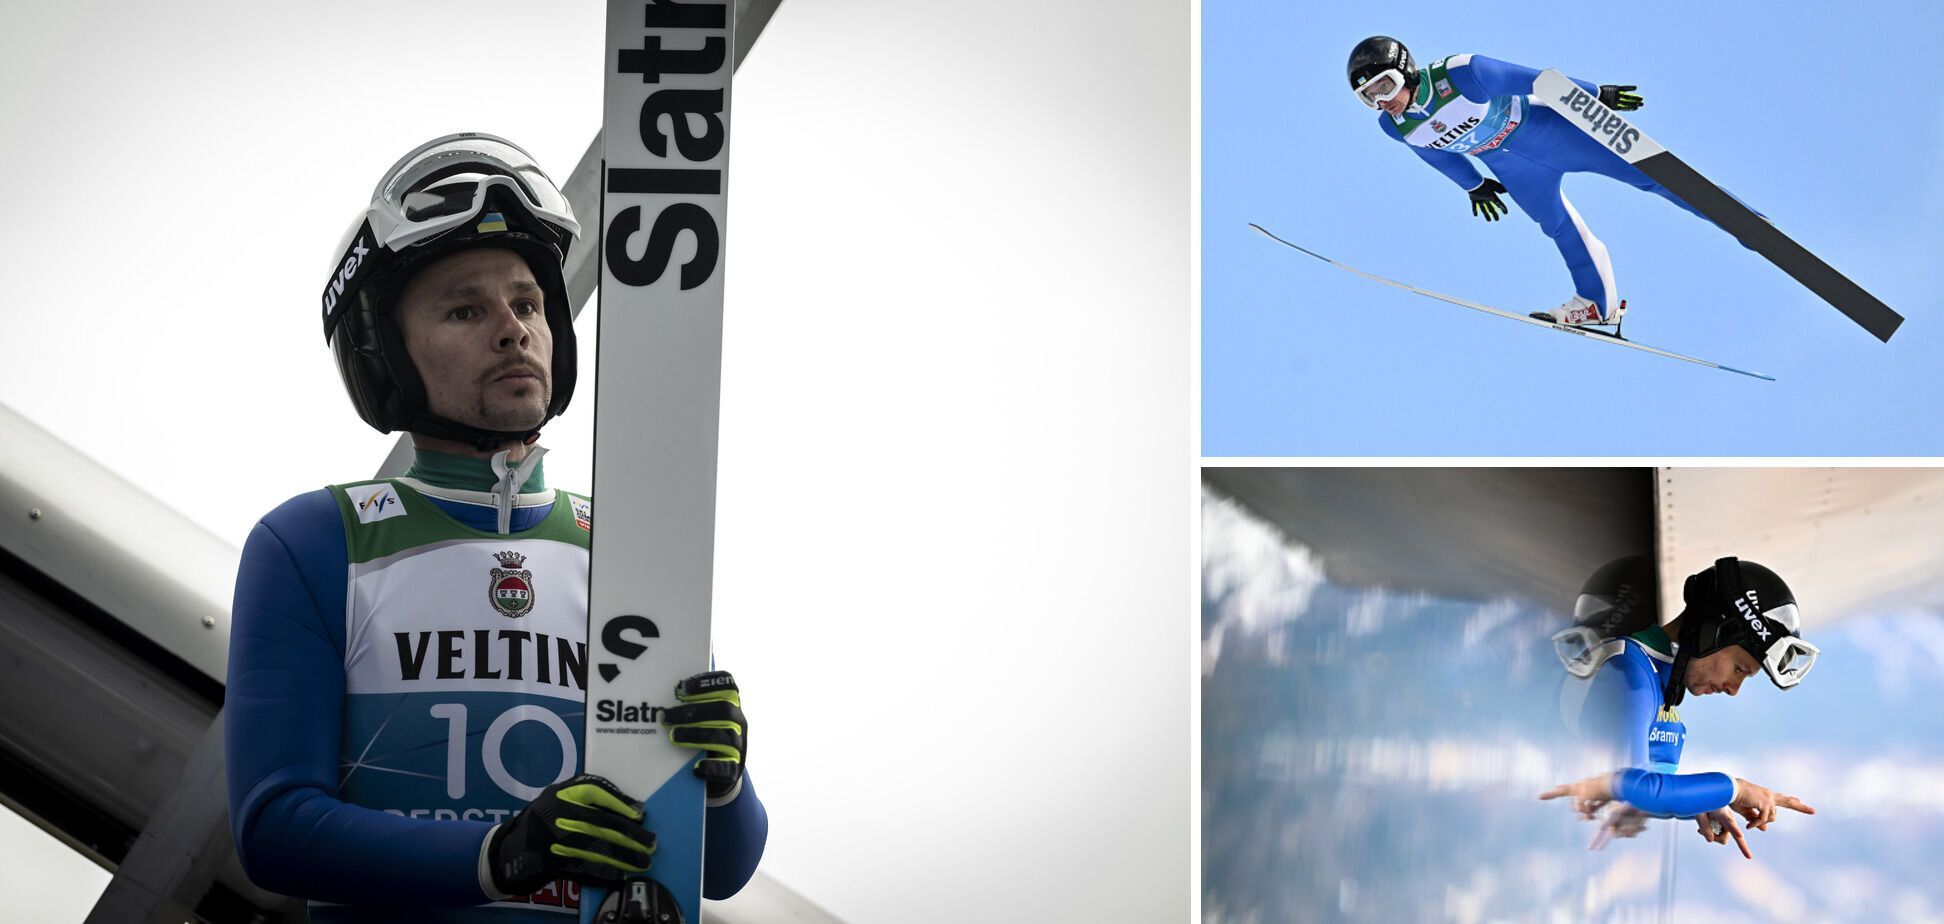 Ukraine set a historic record at the World Cup in ski jumping